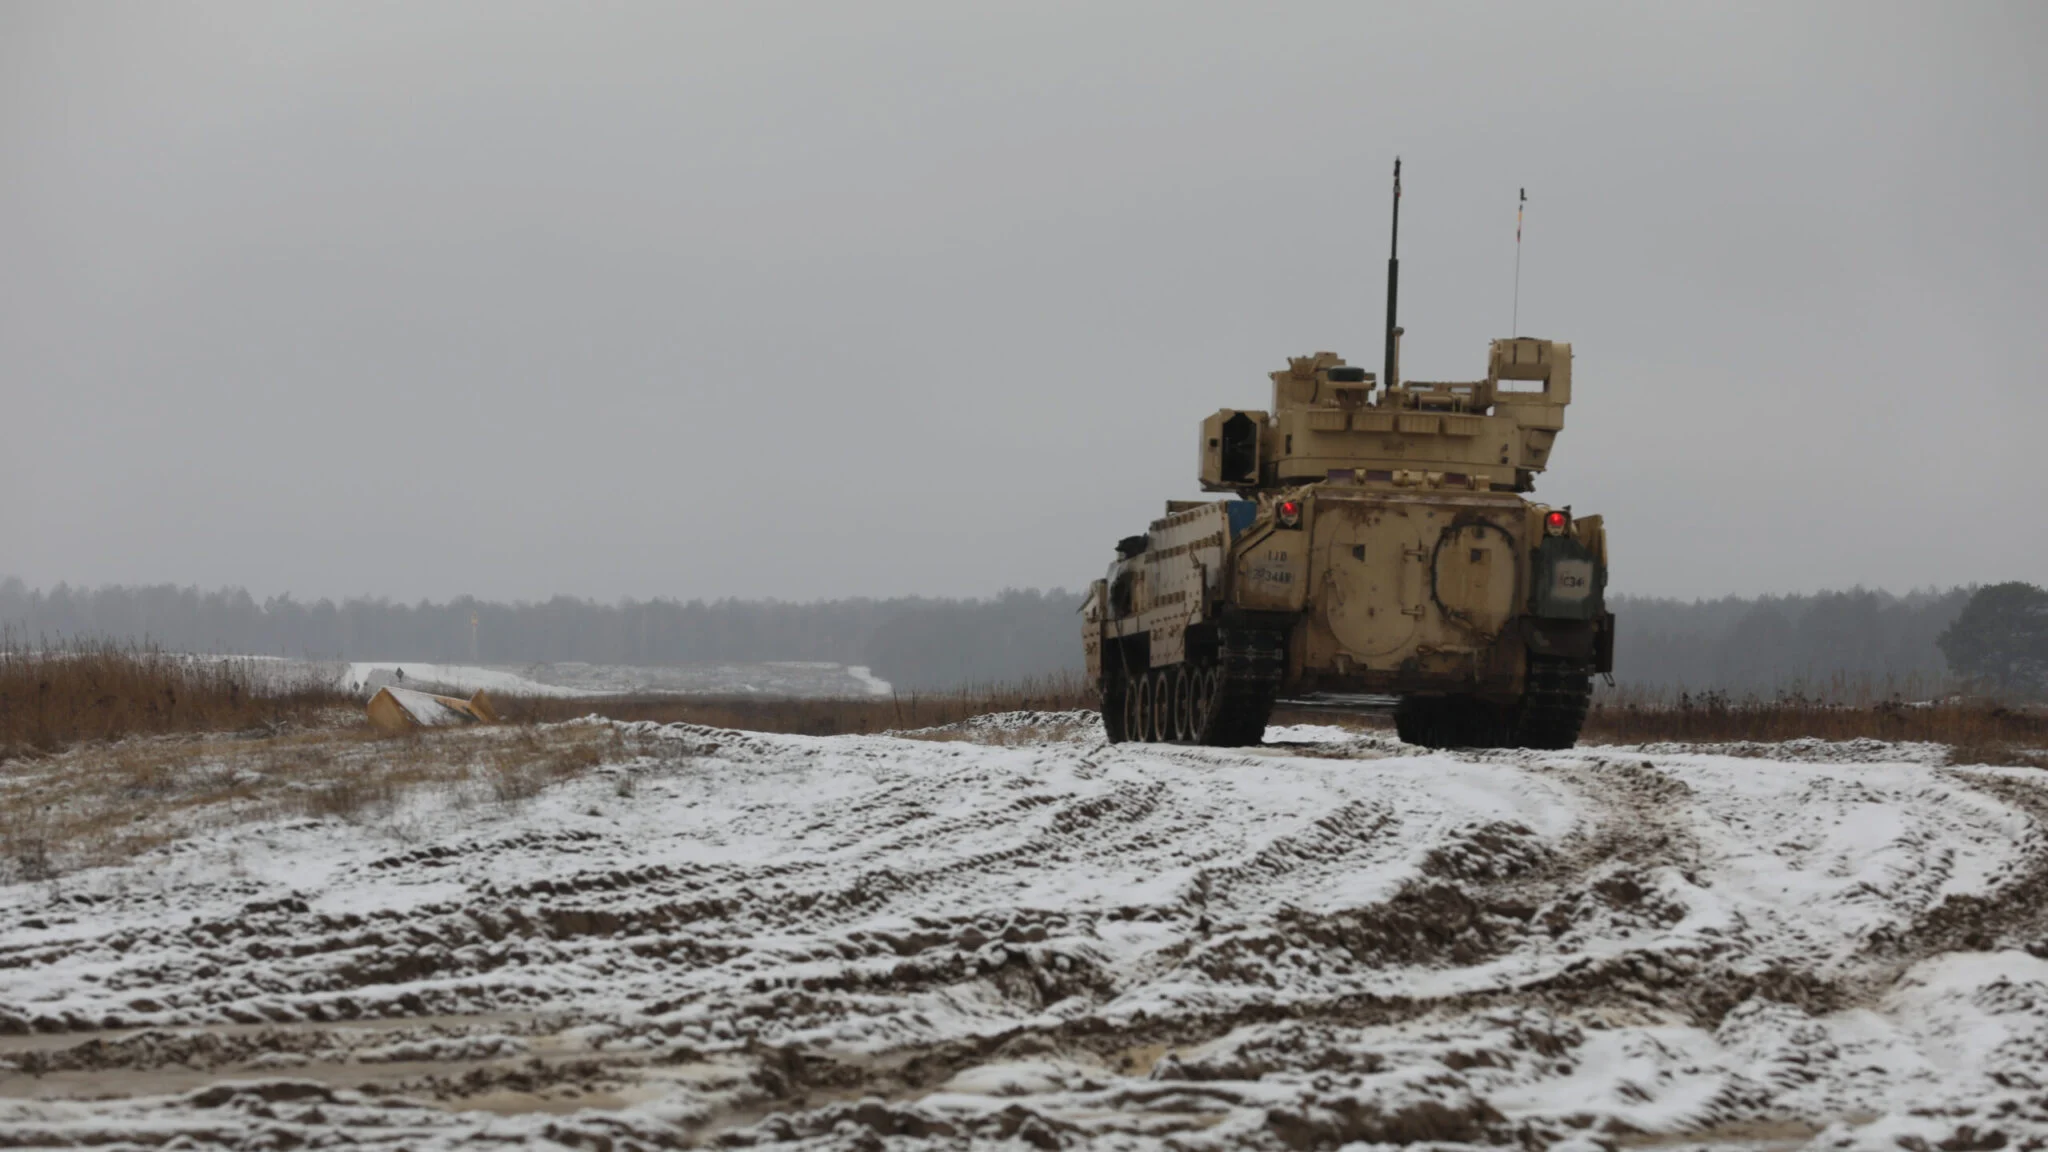 For next OMFV phase, new competitors could join contest to replace Bradley